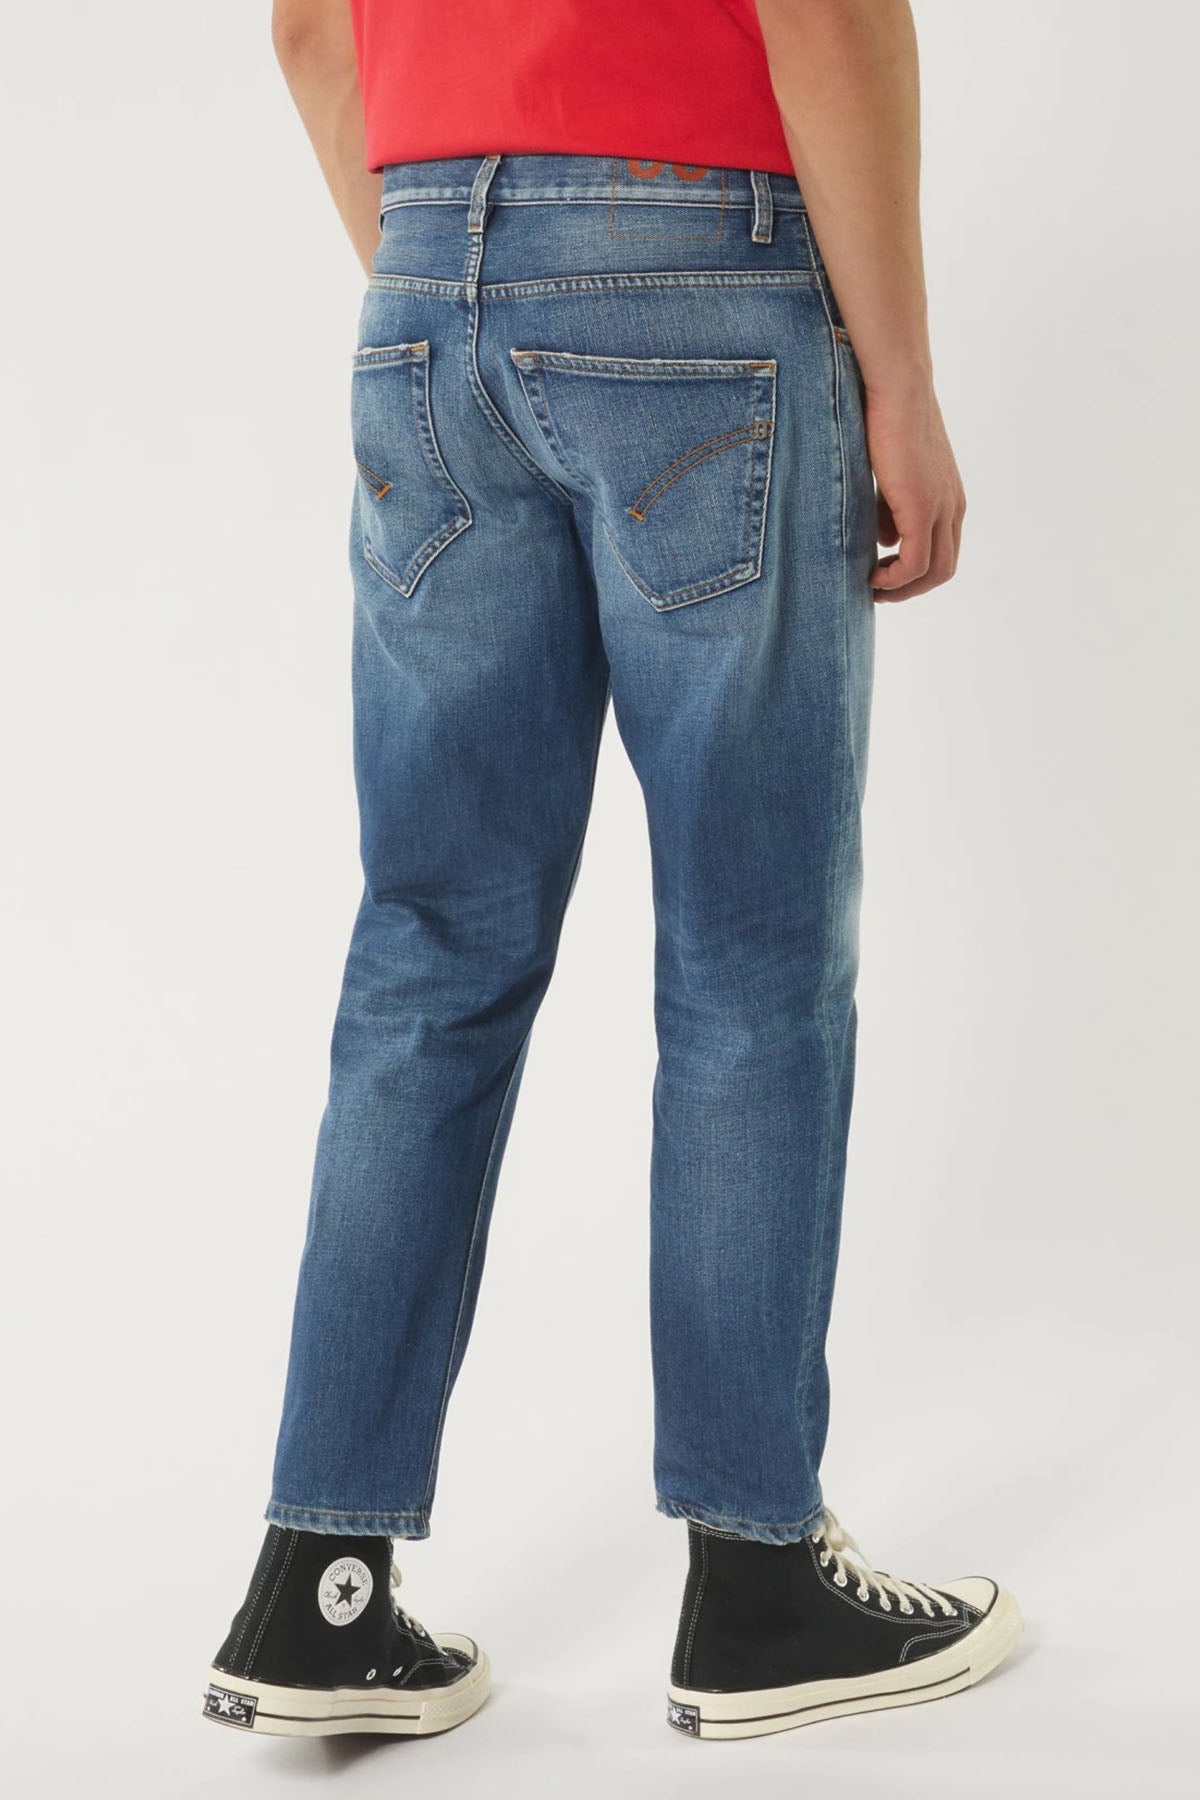 Dondup Brighton Carrot Fit Jeans-Libas Trendy Fashion Store